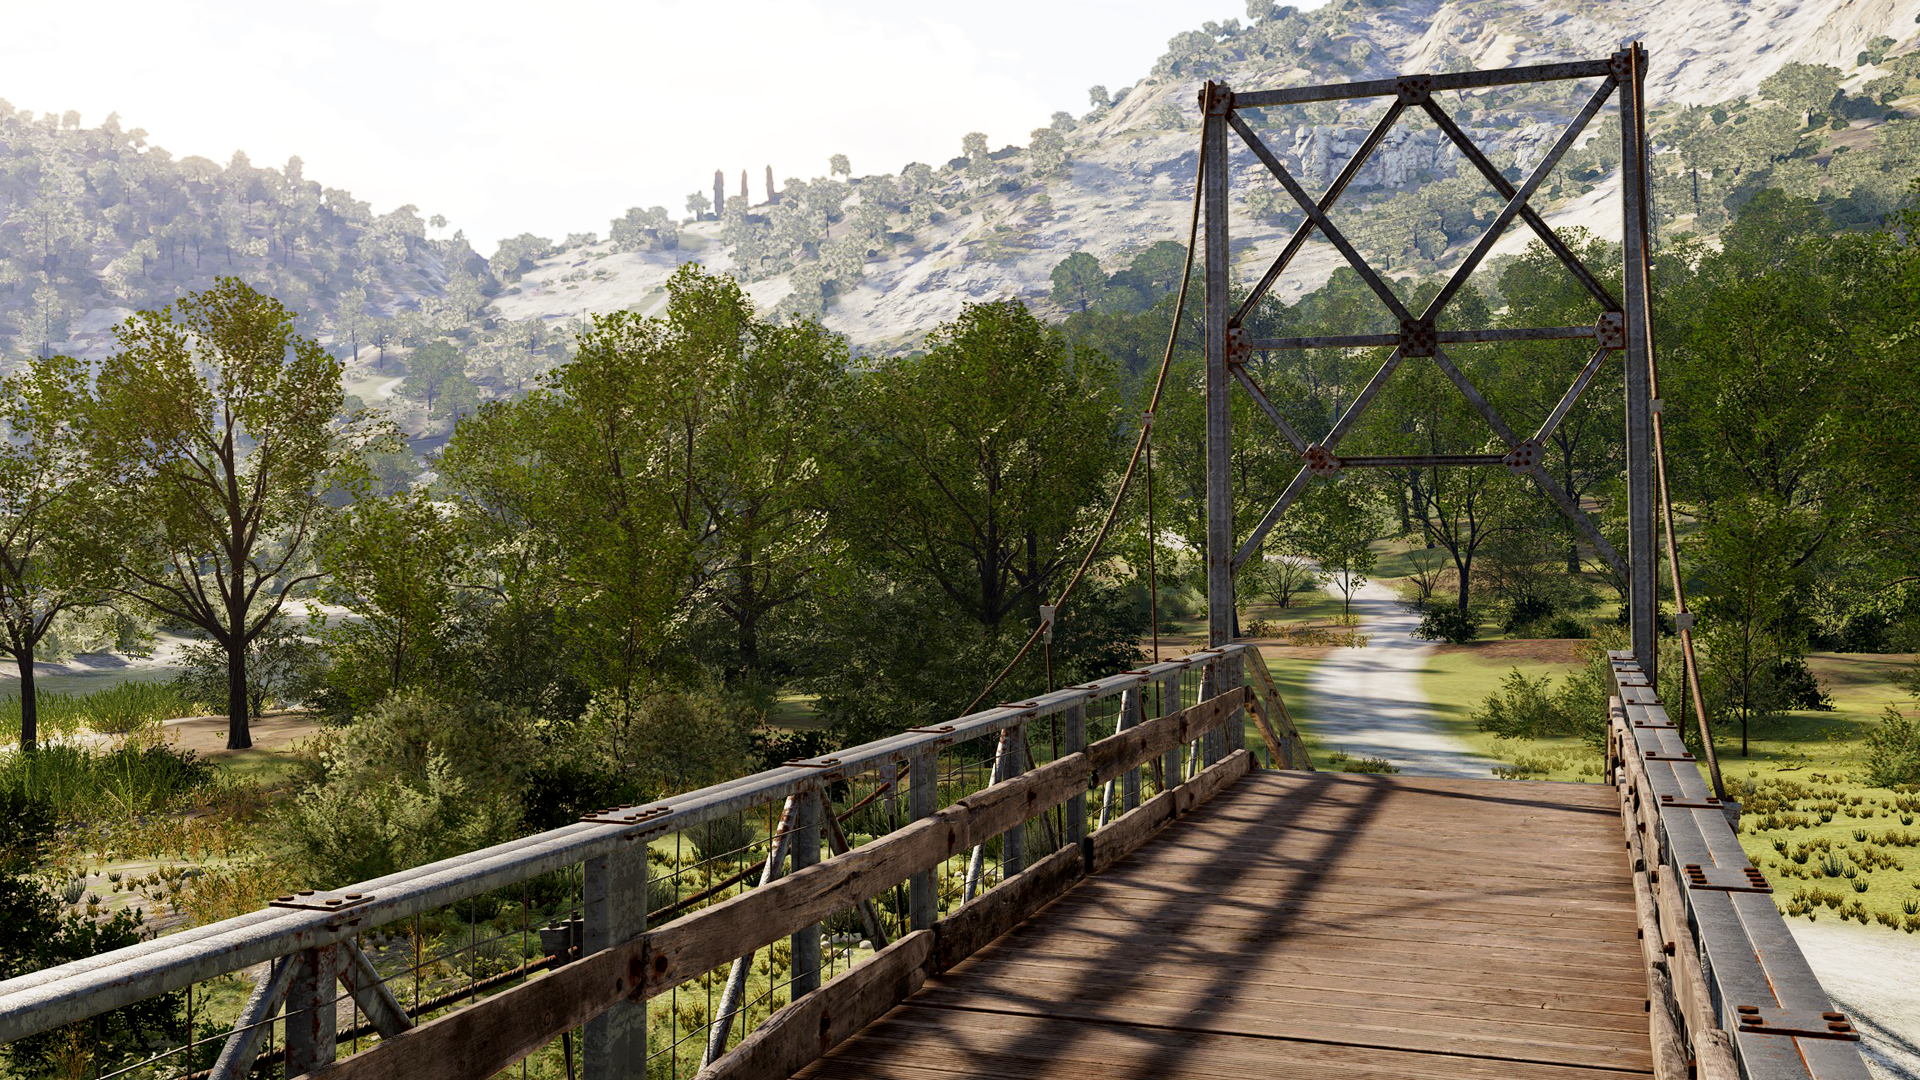 A capture of an old bridge in Call of the Wild: The Angler.